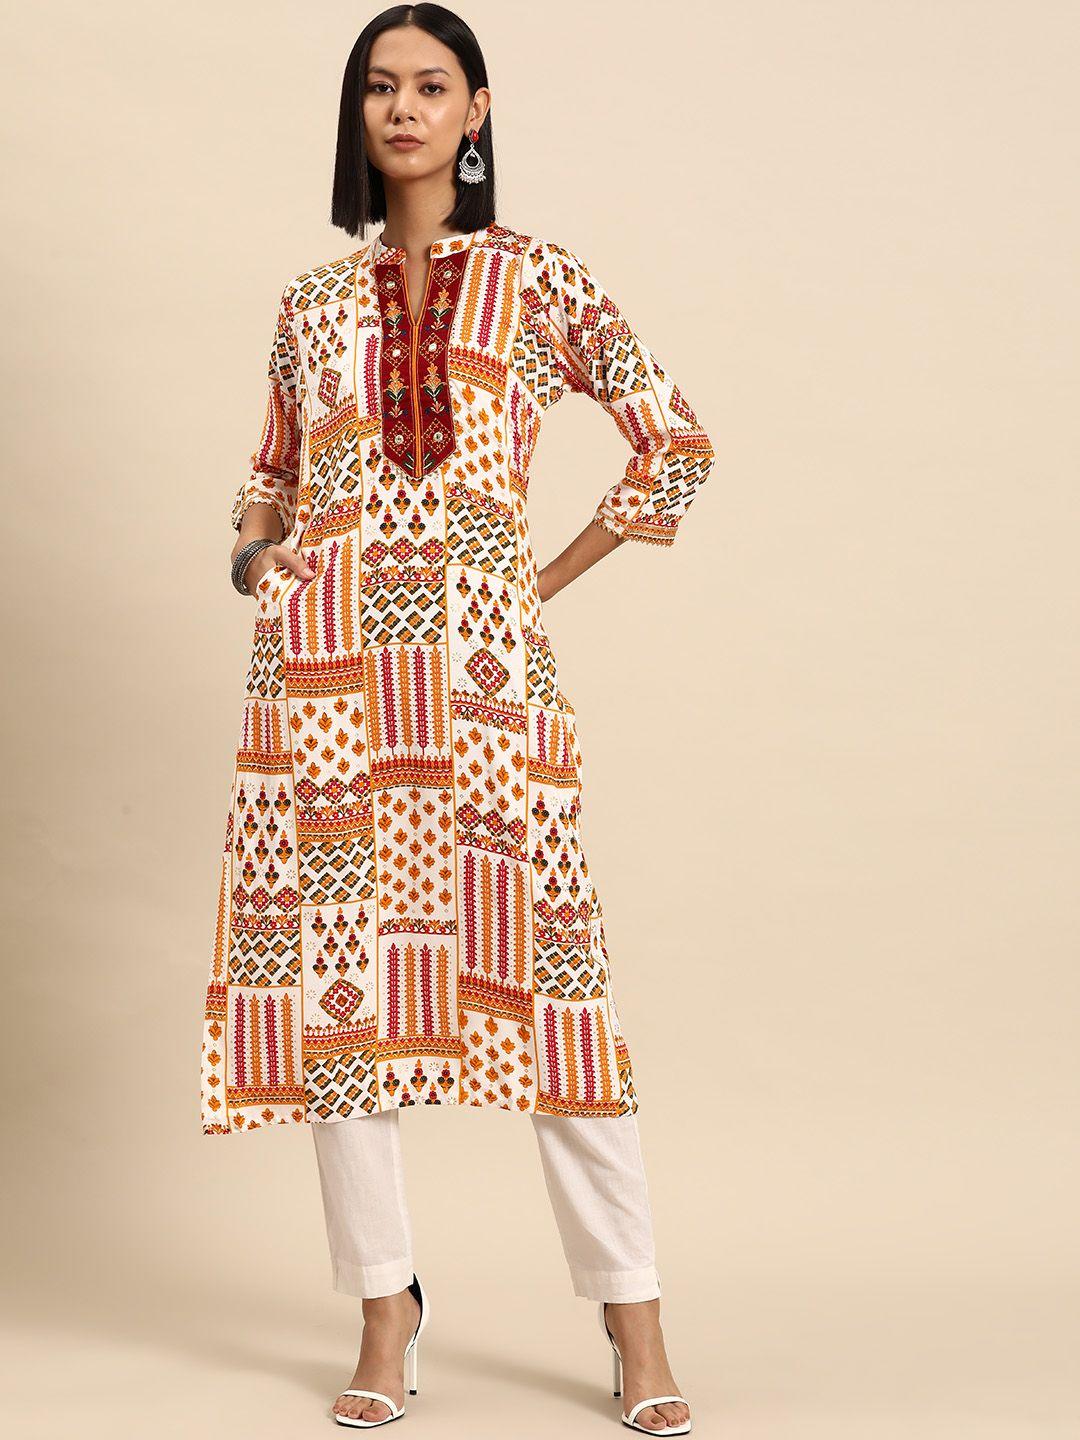 all about you ethnic motifs printed indie prints kurta